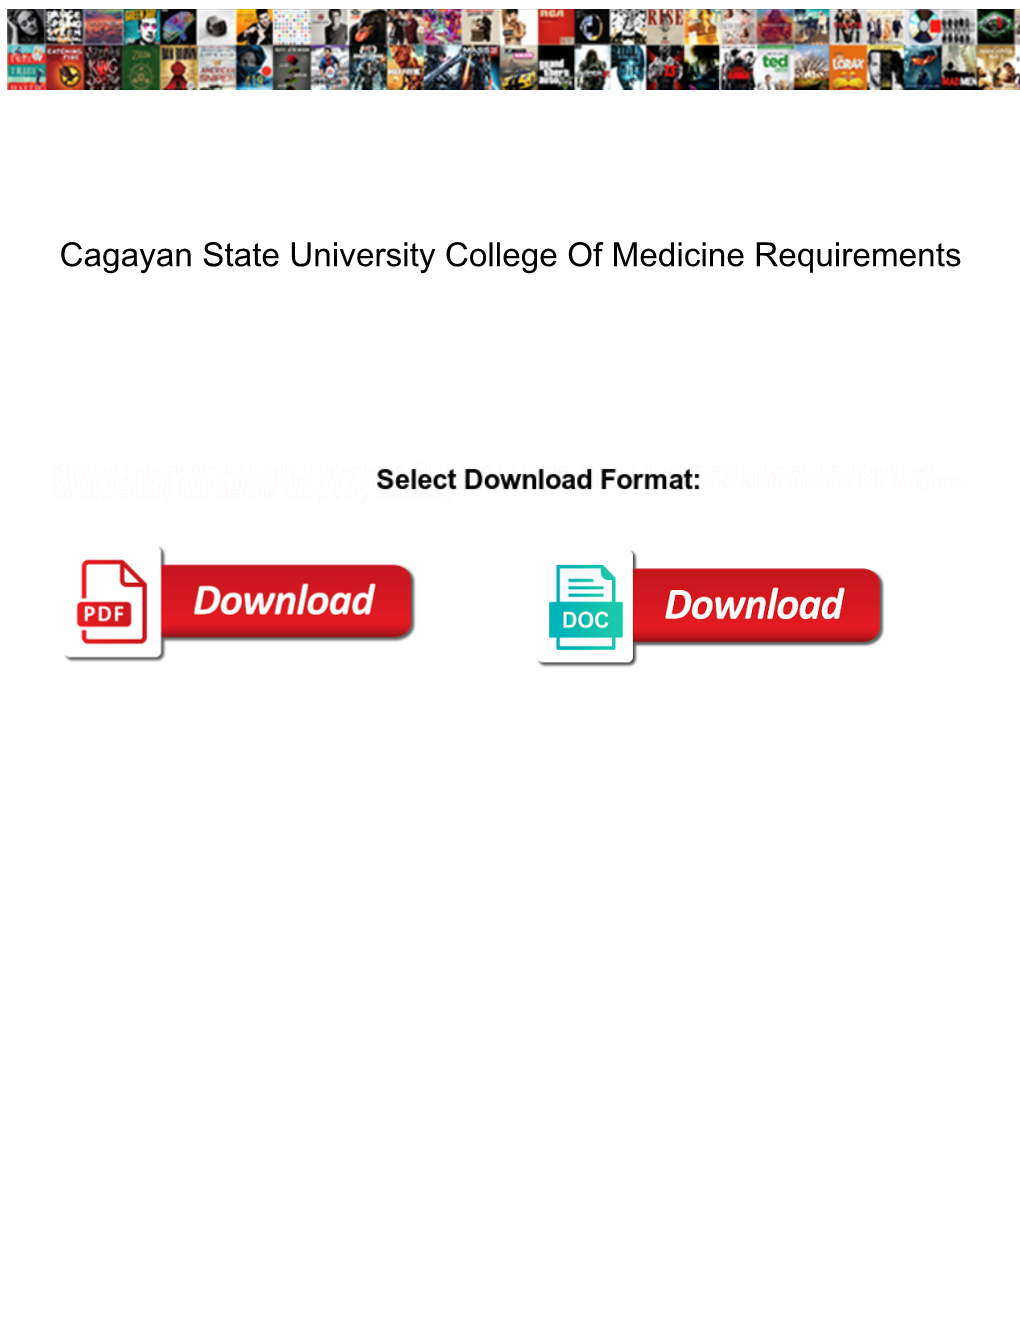 Cagayan State University College of Medicine Requirements